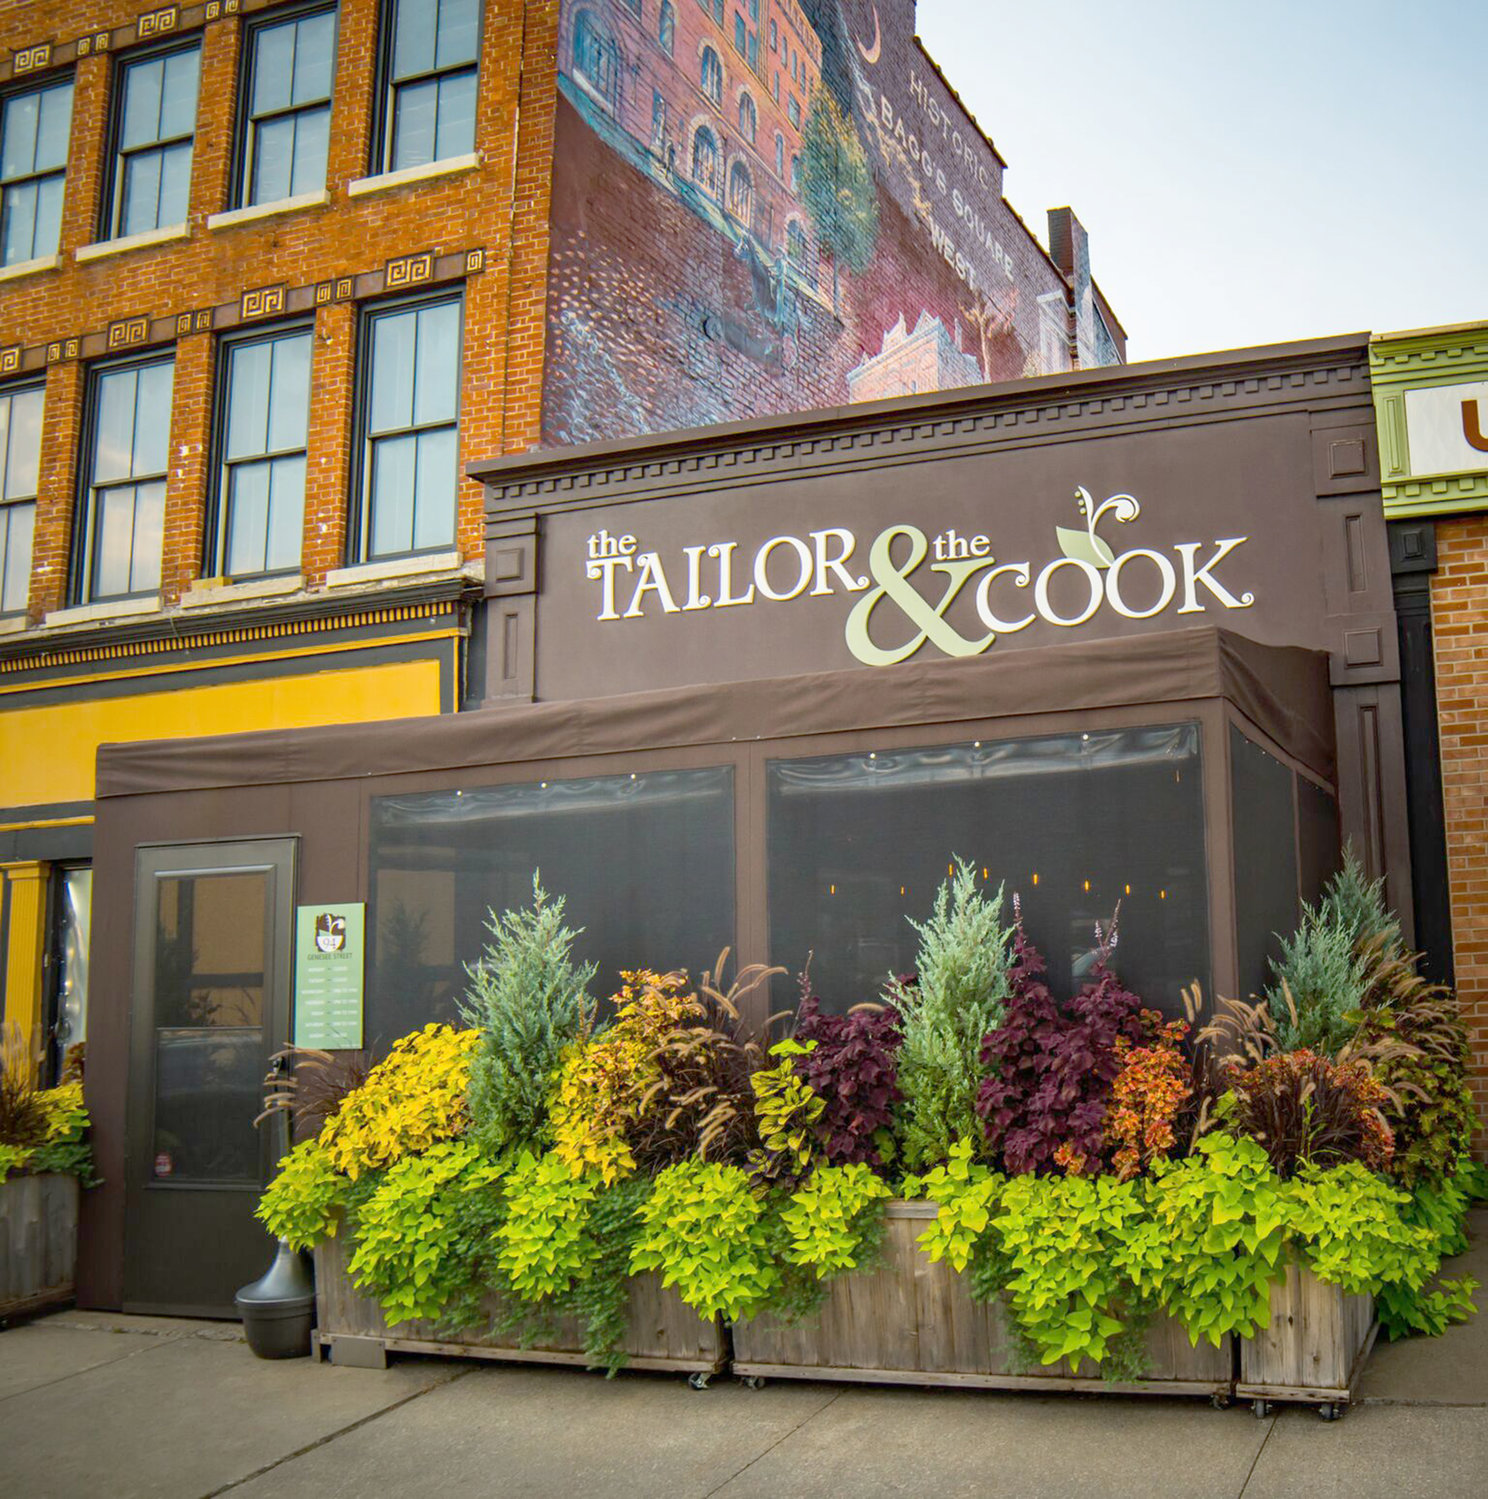 Utica's The Tailor and the Cook restaurant has won the Award of Excellence, an award which recognizes restaurants whose wine lists feature a well-chosen assortment of quality producers along with a thematic match to the menu in both price and style.